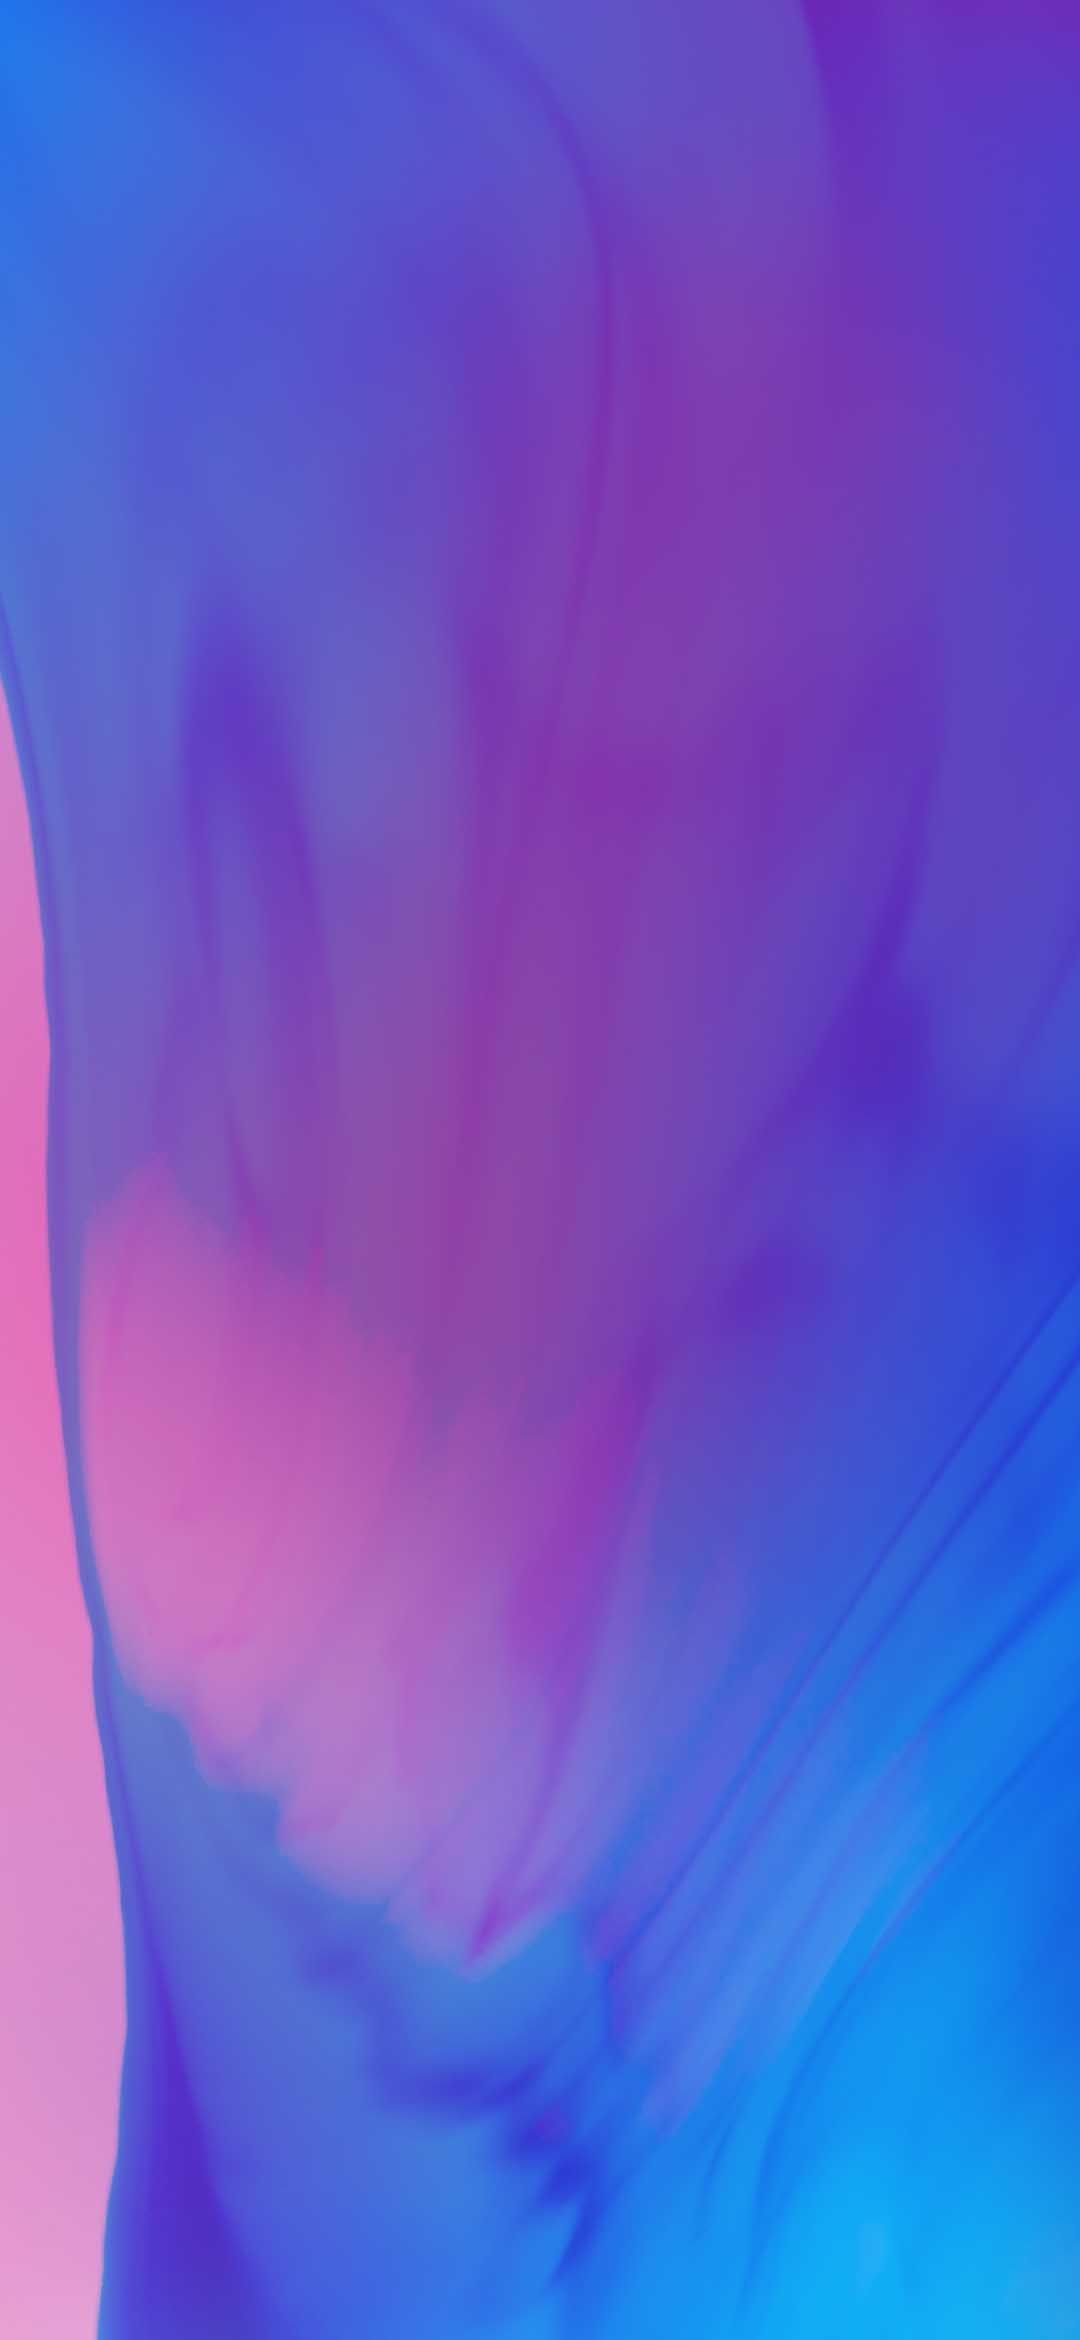 Samsung Galaxy A70 Wallpapers (FHD+) - Download - DroidViews